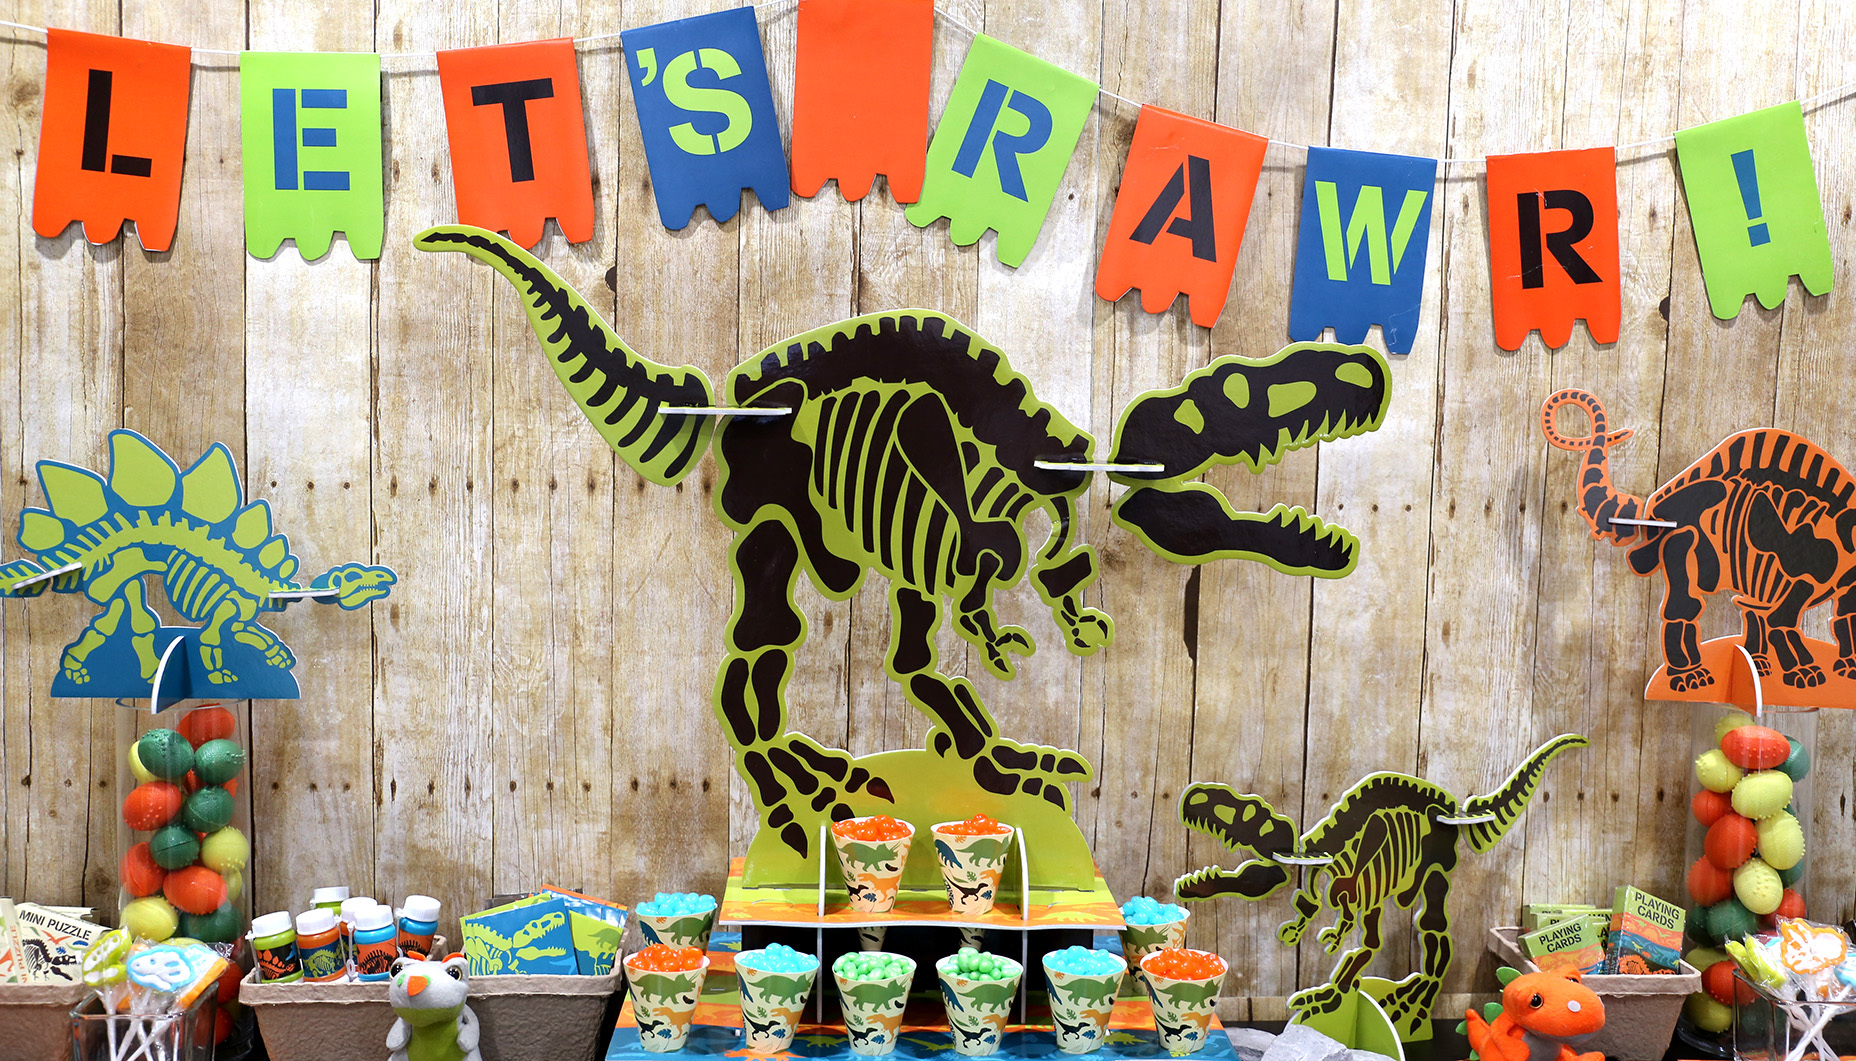 Dinosaur Game for Kids | Dino Says Game | Stay at home Activity | Dinosaur  Birthday Party | Class Printable Indoor or outdoor Game Cards